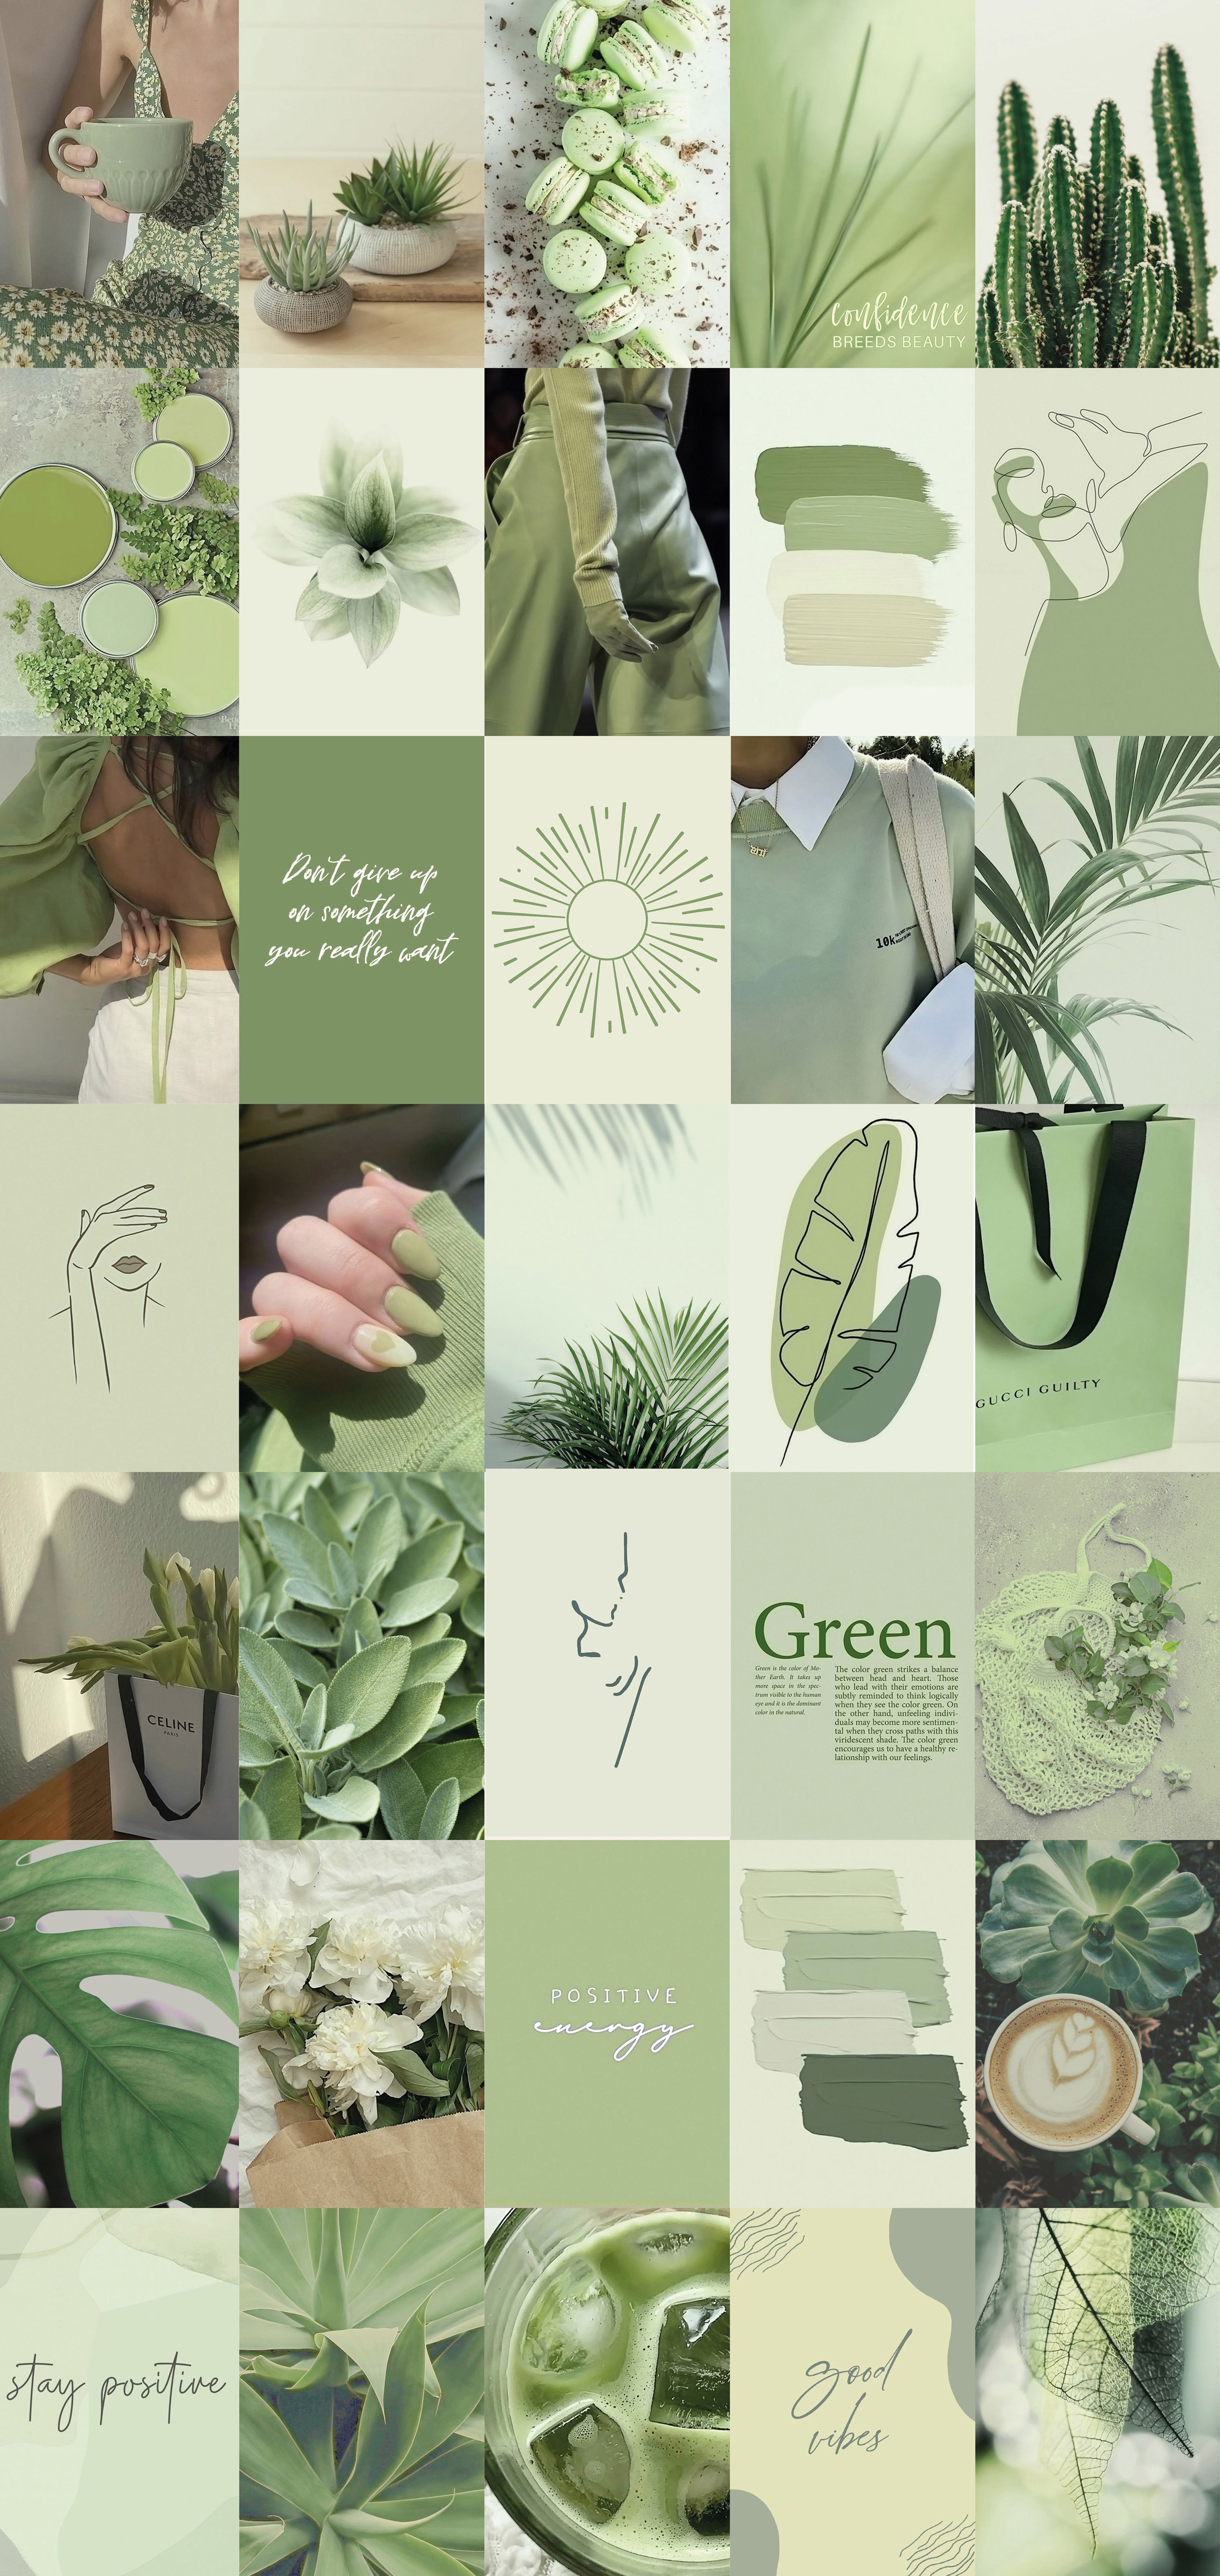 A collage of 30 photos in shades of green, with a mix of plants, food, and motivational quotes. - Soft green